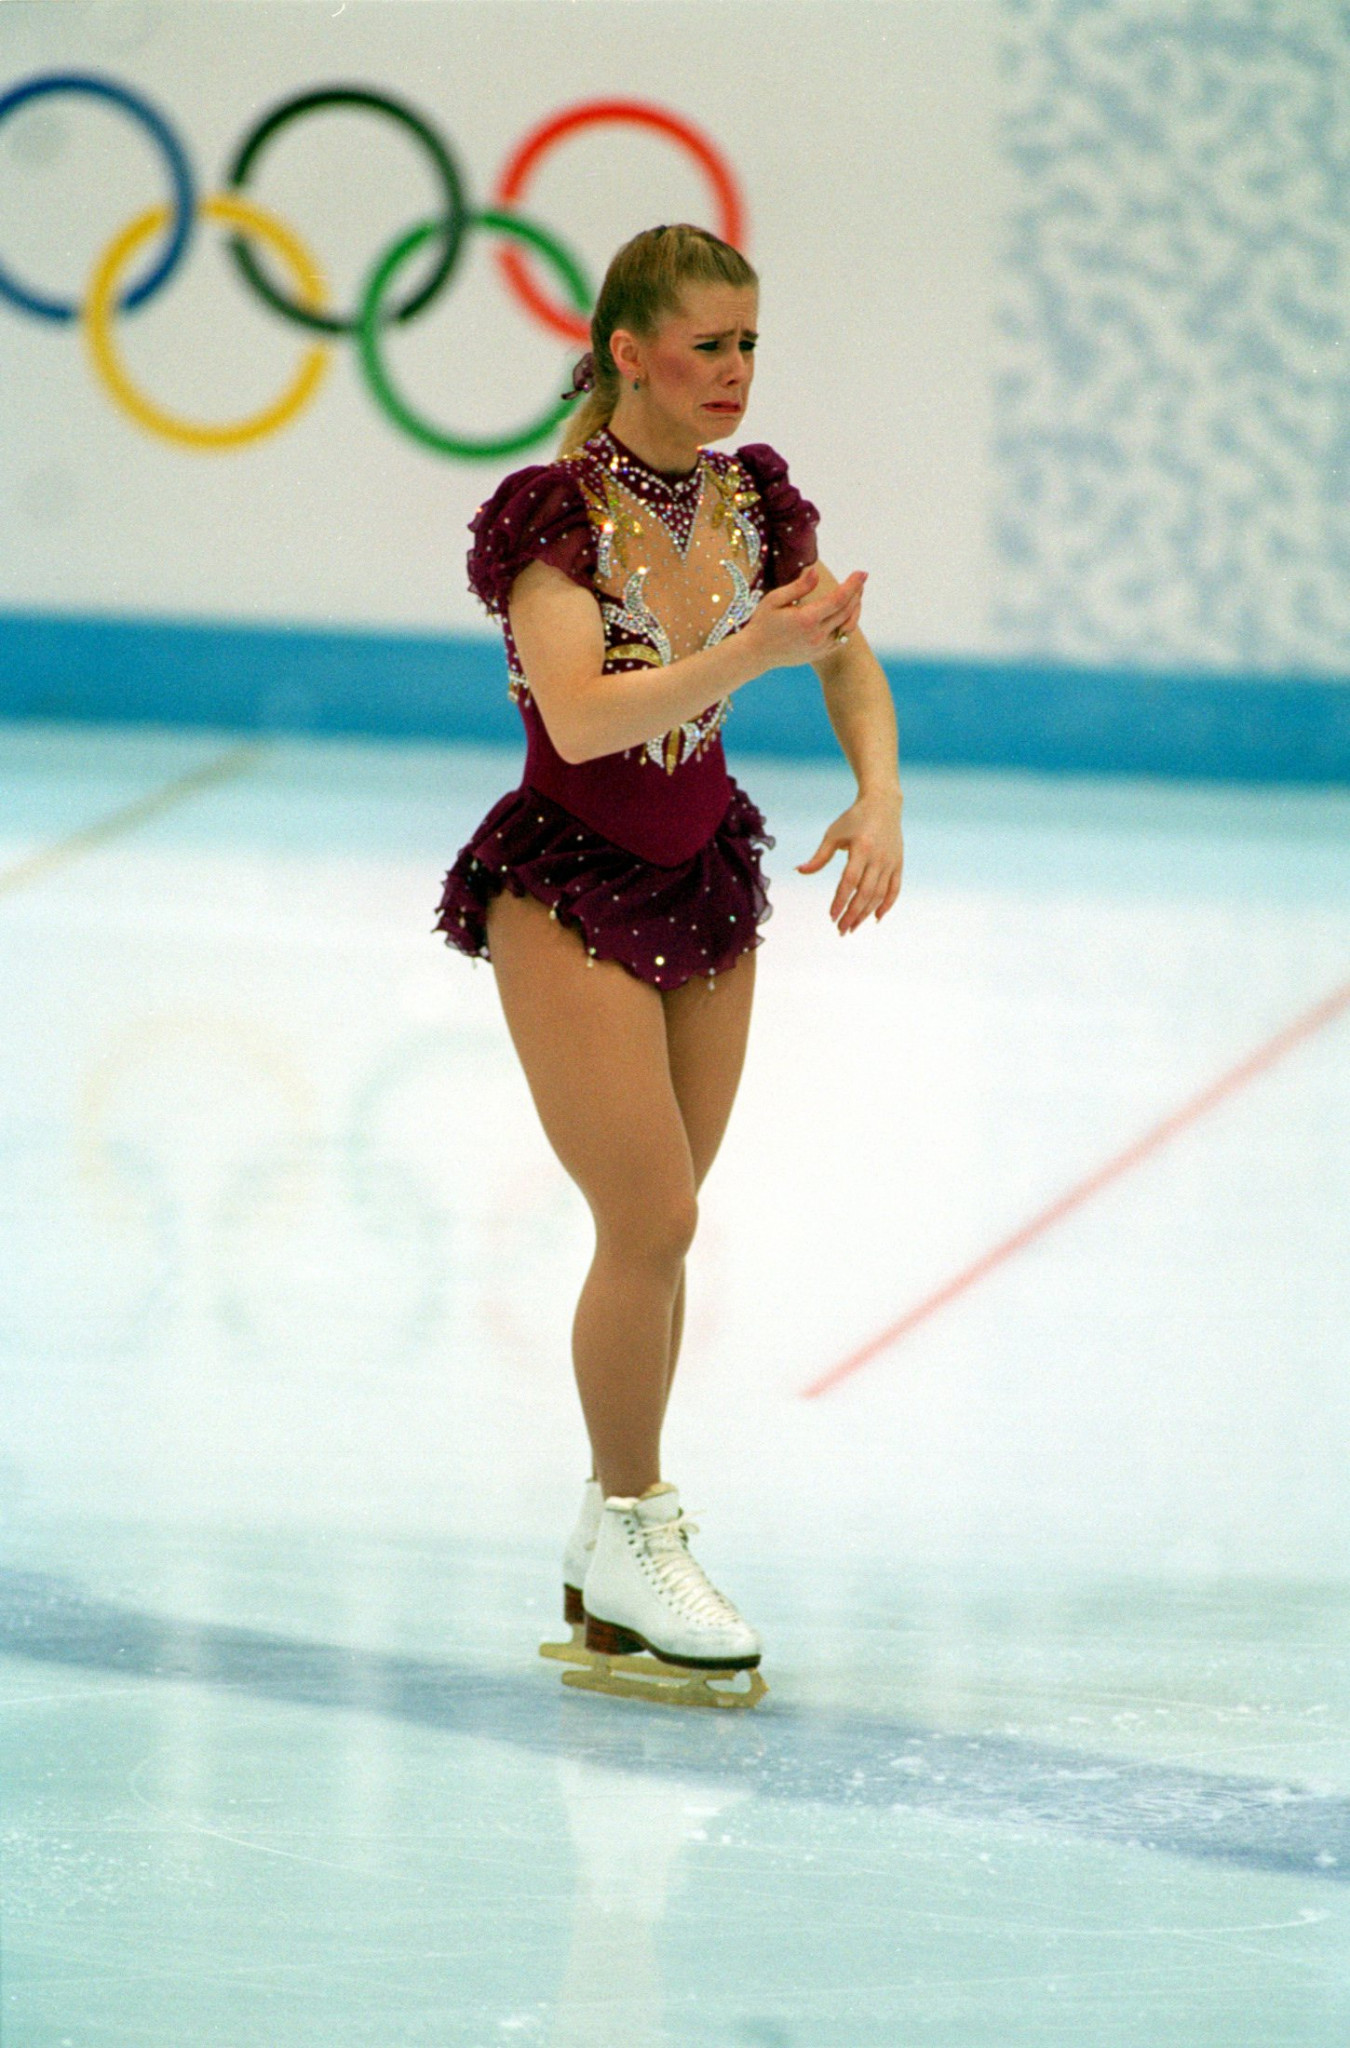 Tonya Harding competes at Lillehammer 1994 in the middle of a media storm ©Getty Images